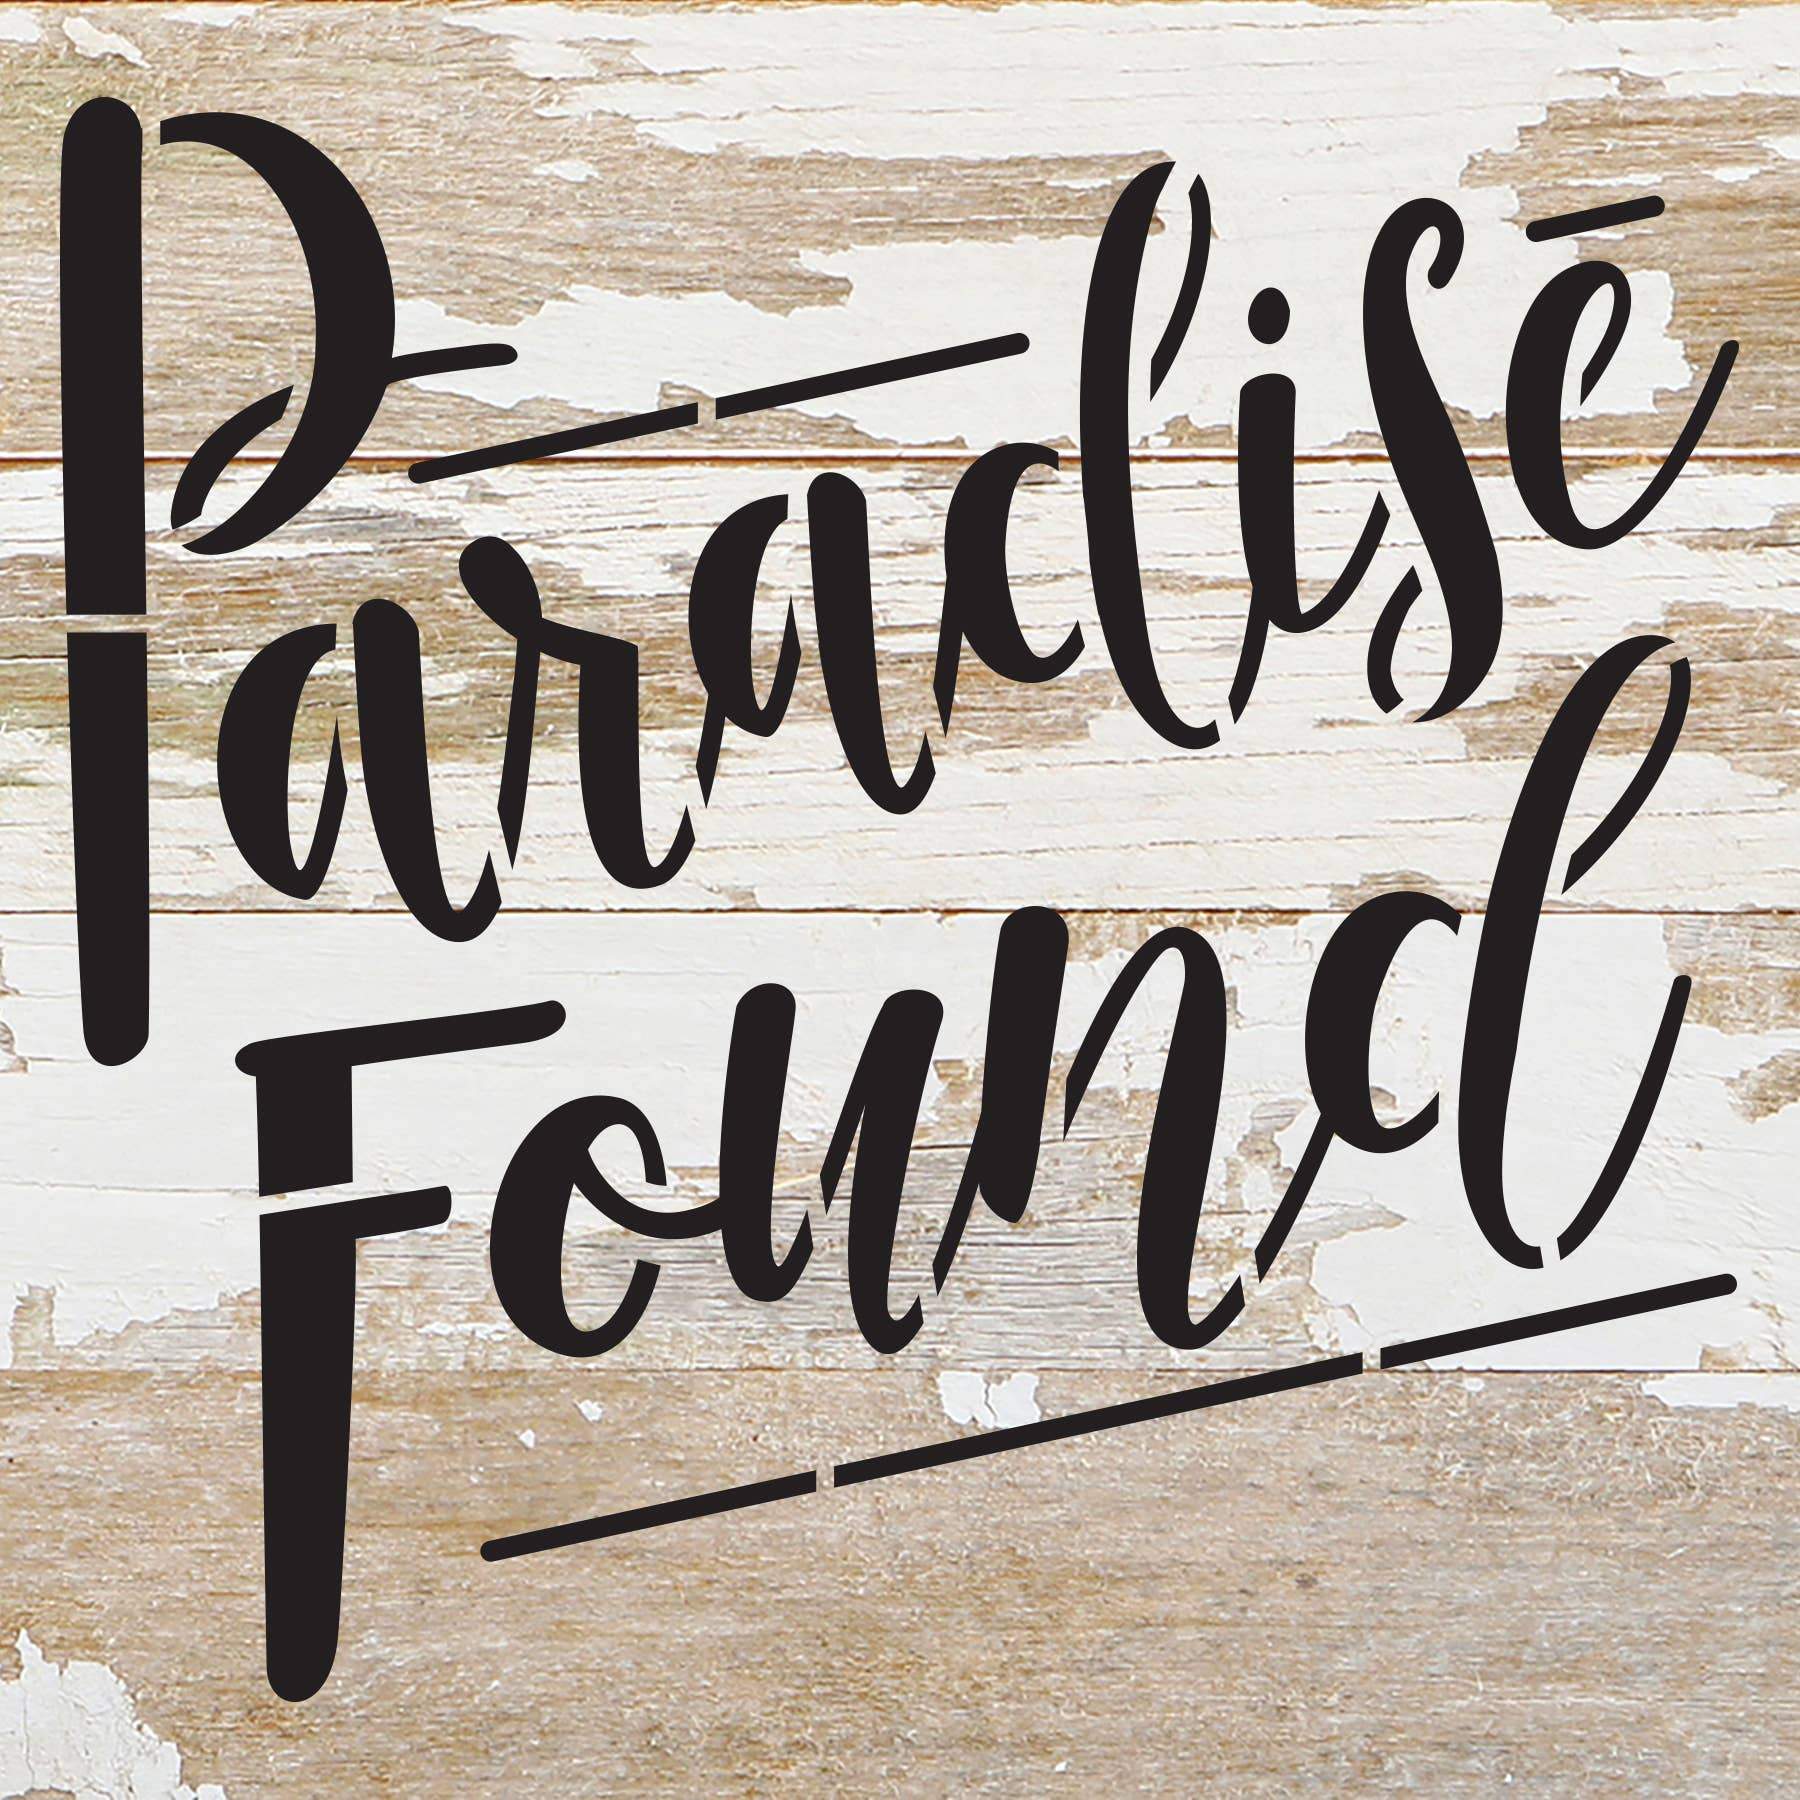 Paradise Found / 6"X6" Reclaimed Wood Wall Sign